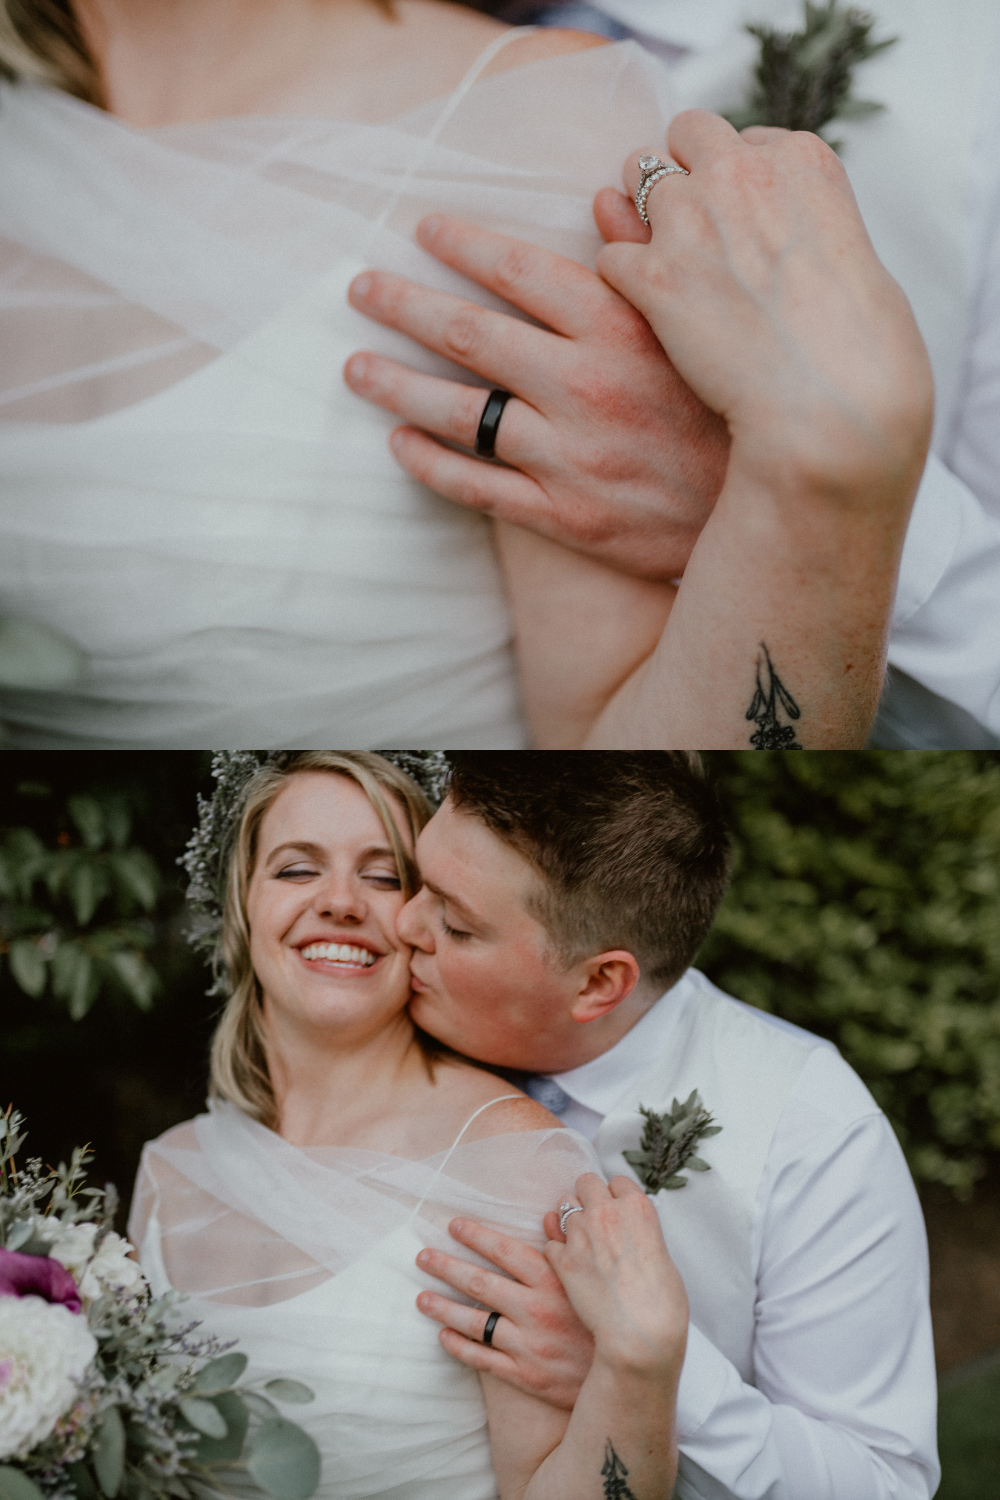 Bride and Groom pose and kiss with their rings after they say wedding vows in intimate backyard elopement | Seattle Wedding Photographer, Seattle Elopement Photographer | chelseaabril.com